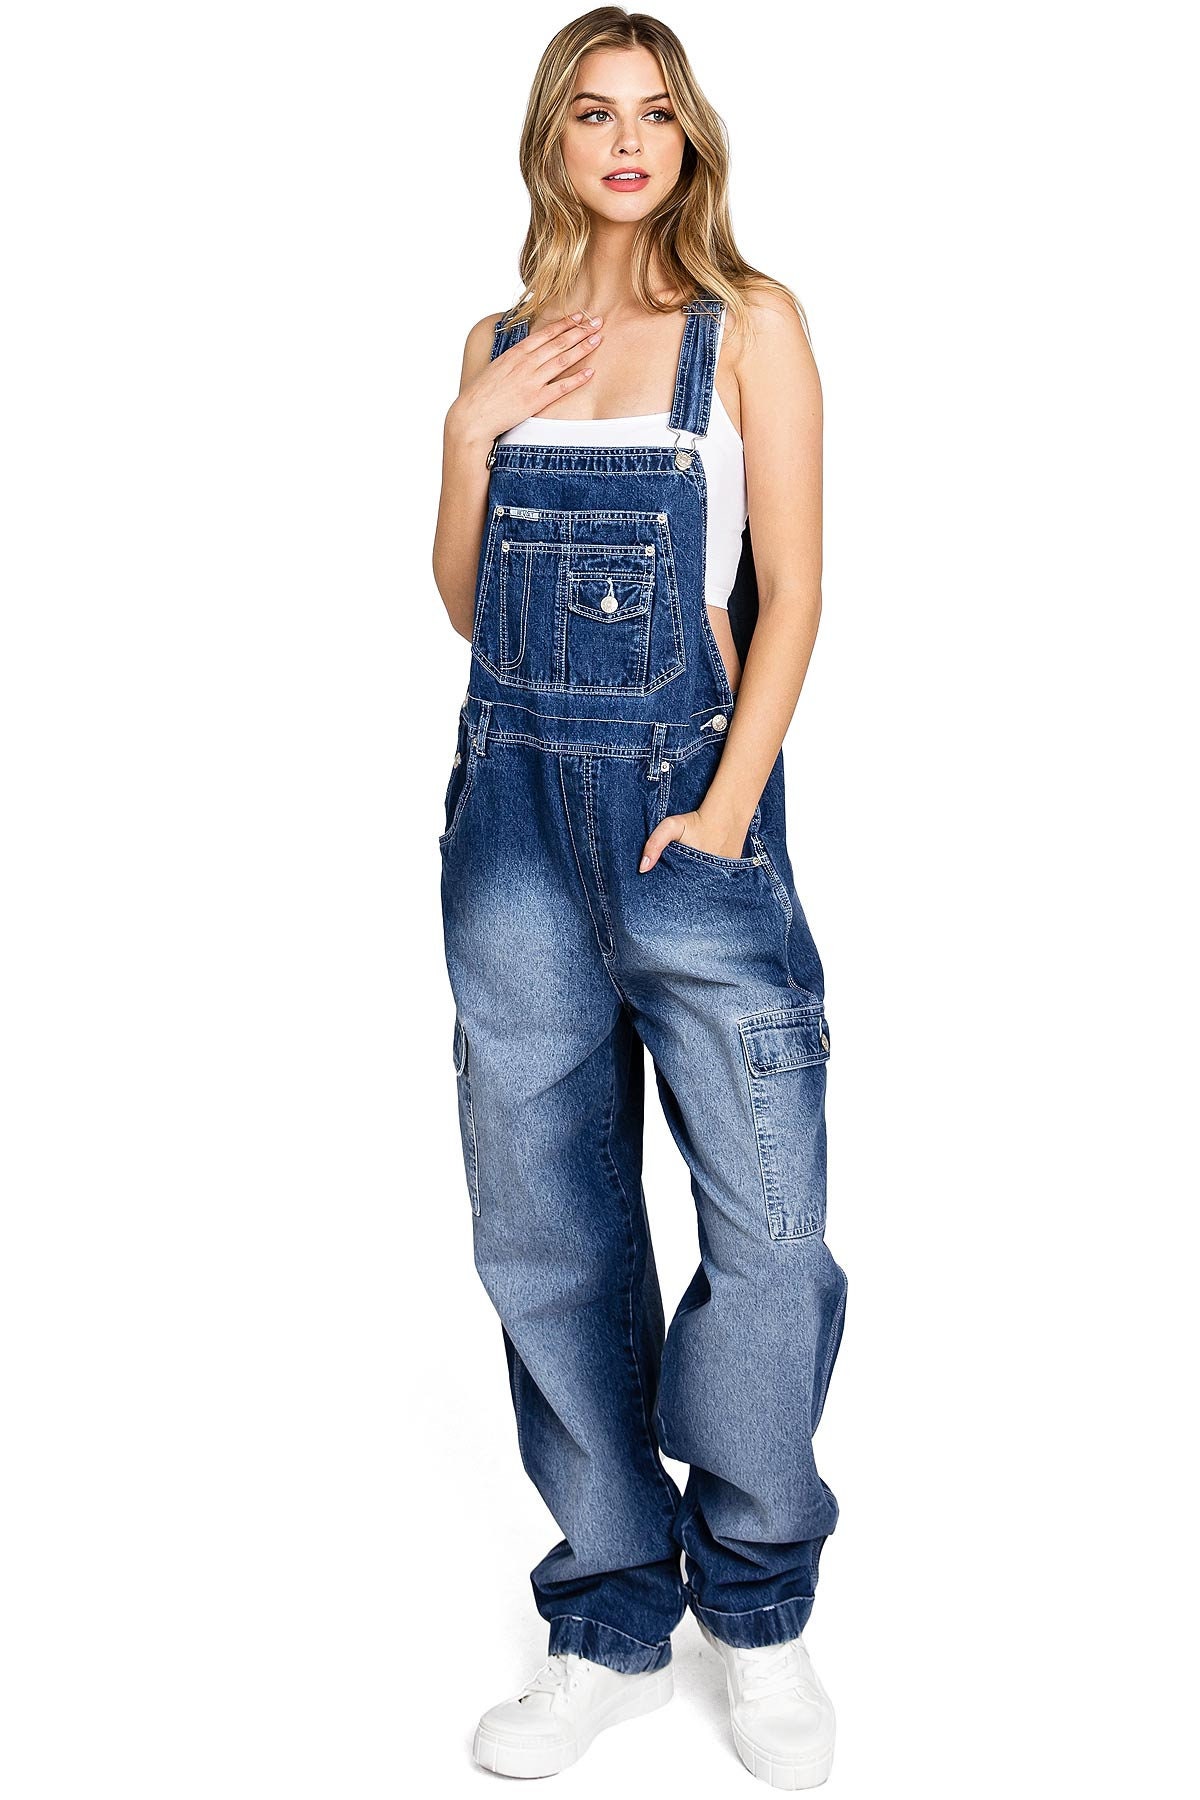 PLUS SIZE Revolt 90s Denim Vintage Overalls With Cargo Style - Etsy Canada